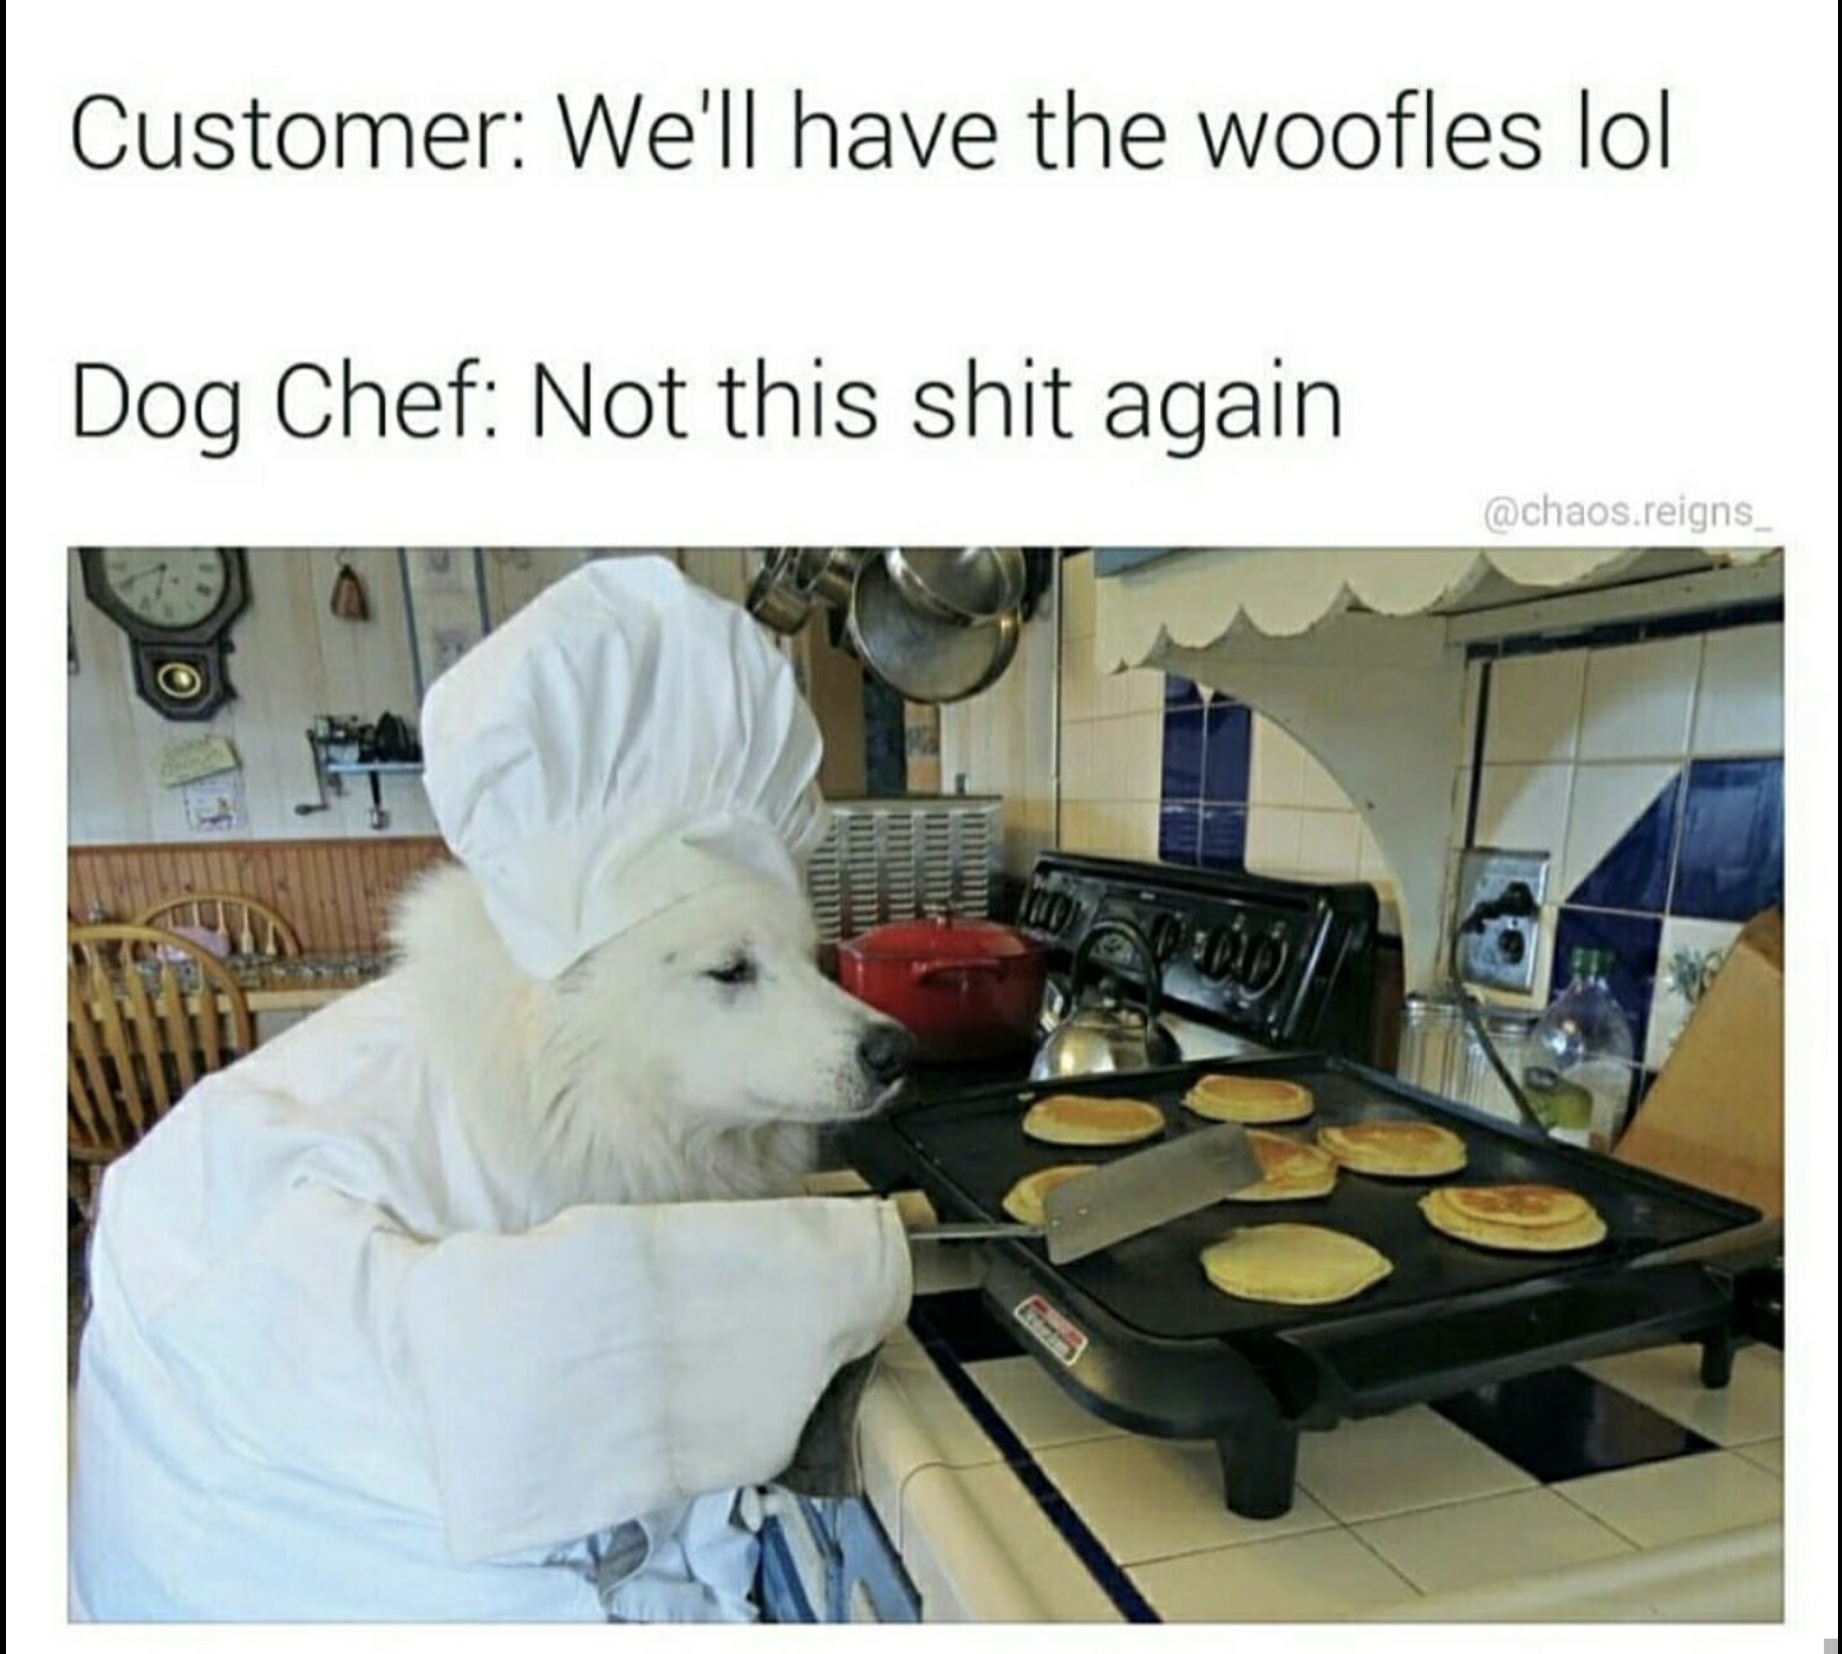 Funny dog chef taking jokes about making woofles